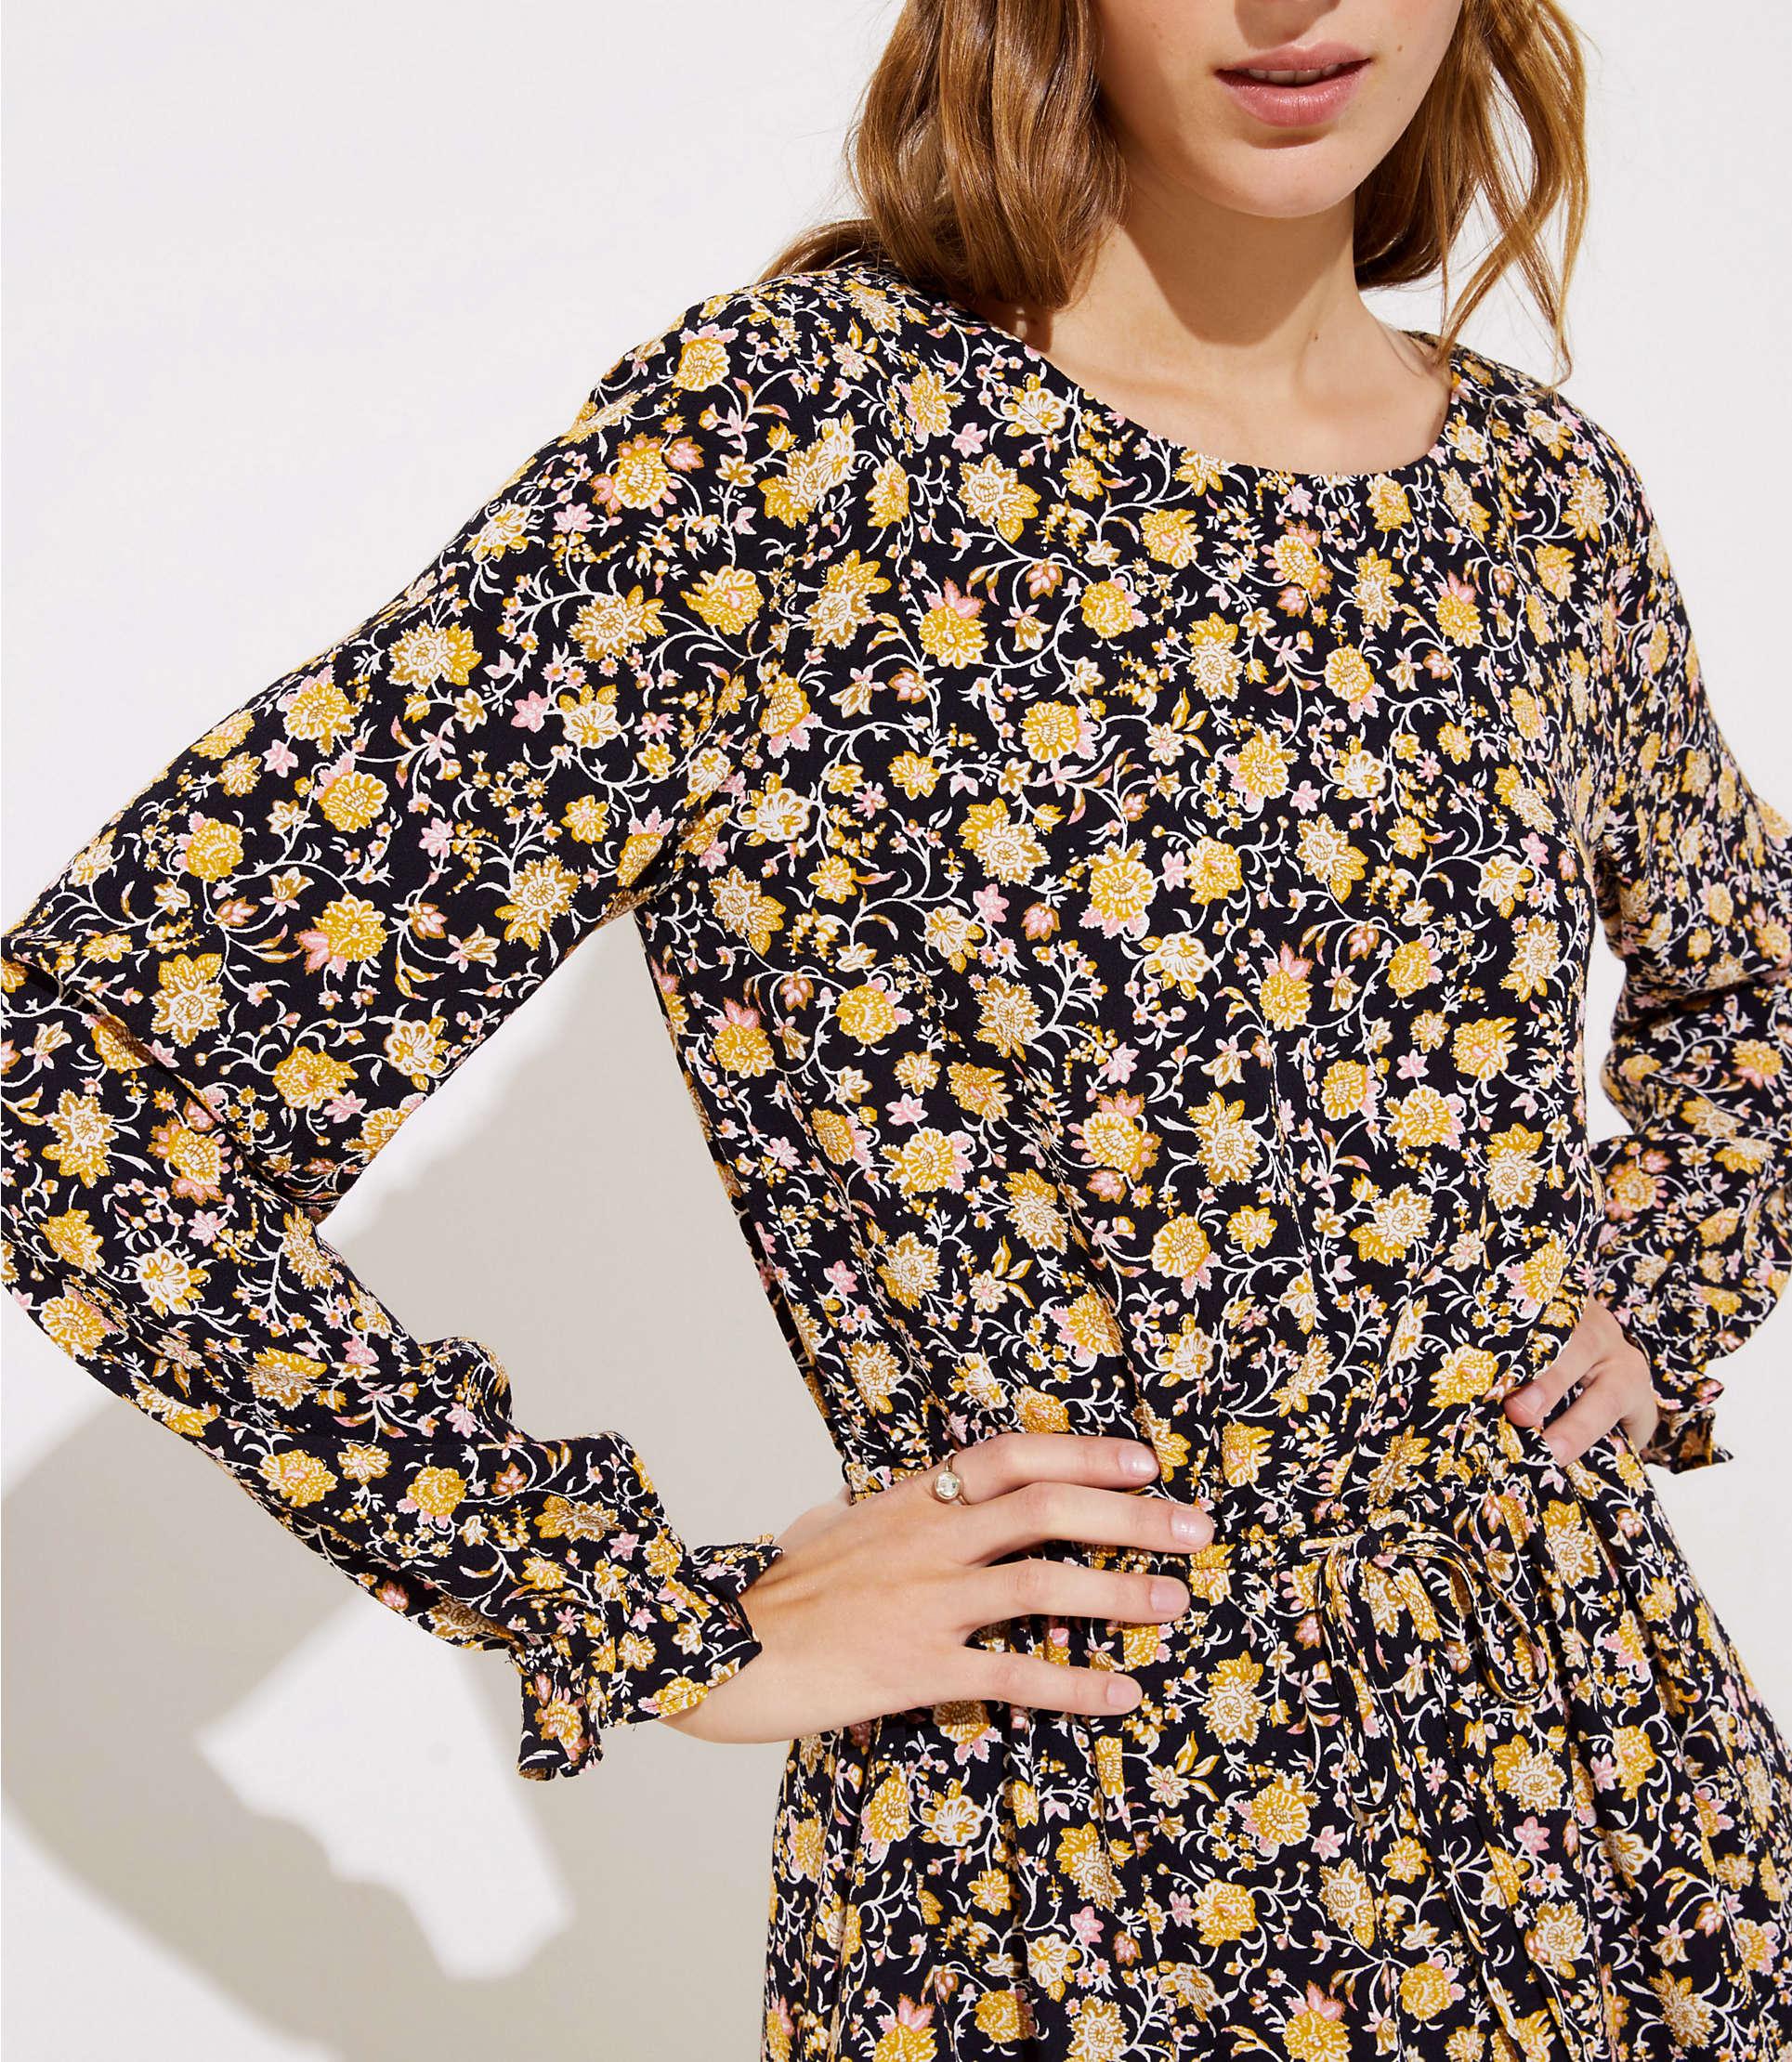 Loft Yellow Floral Dress Top Sellers ...